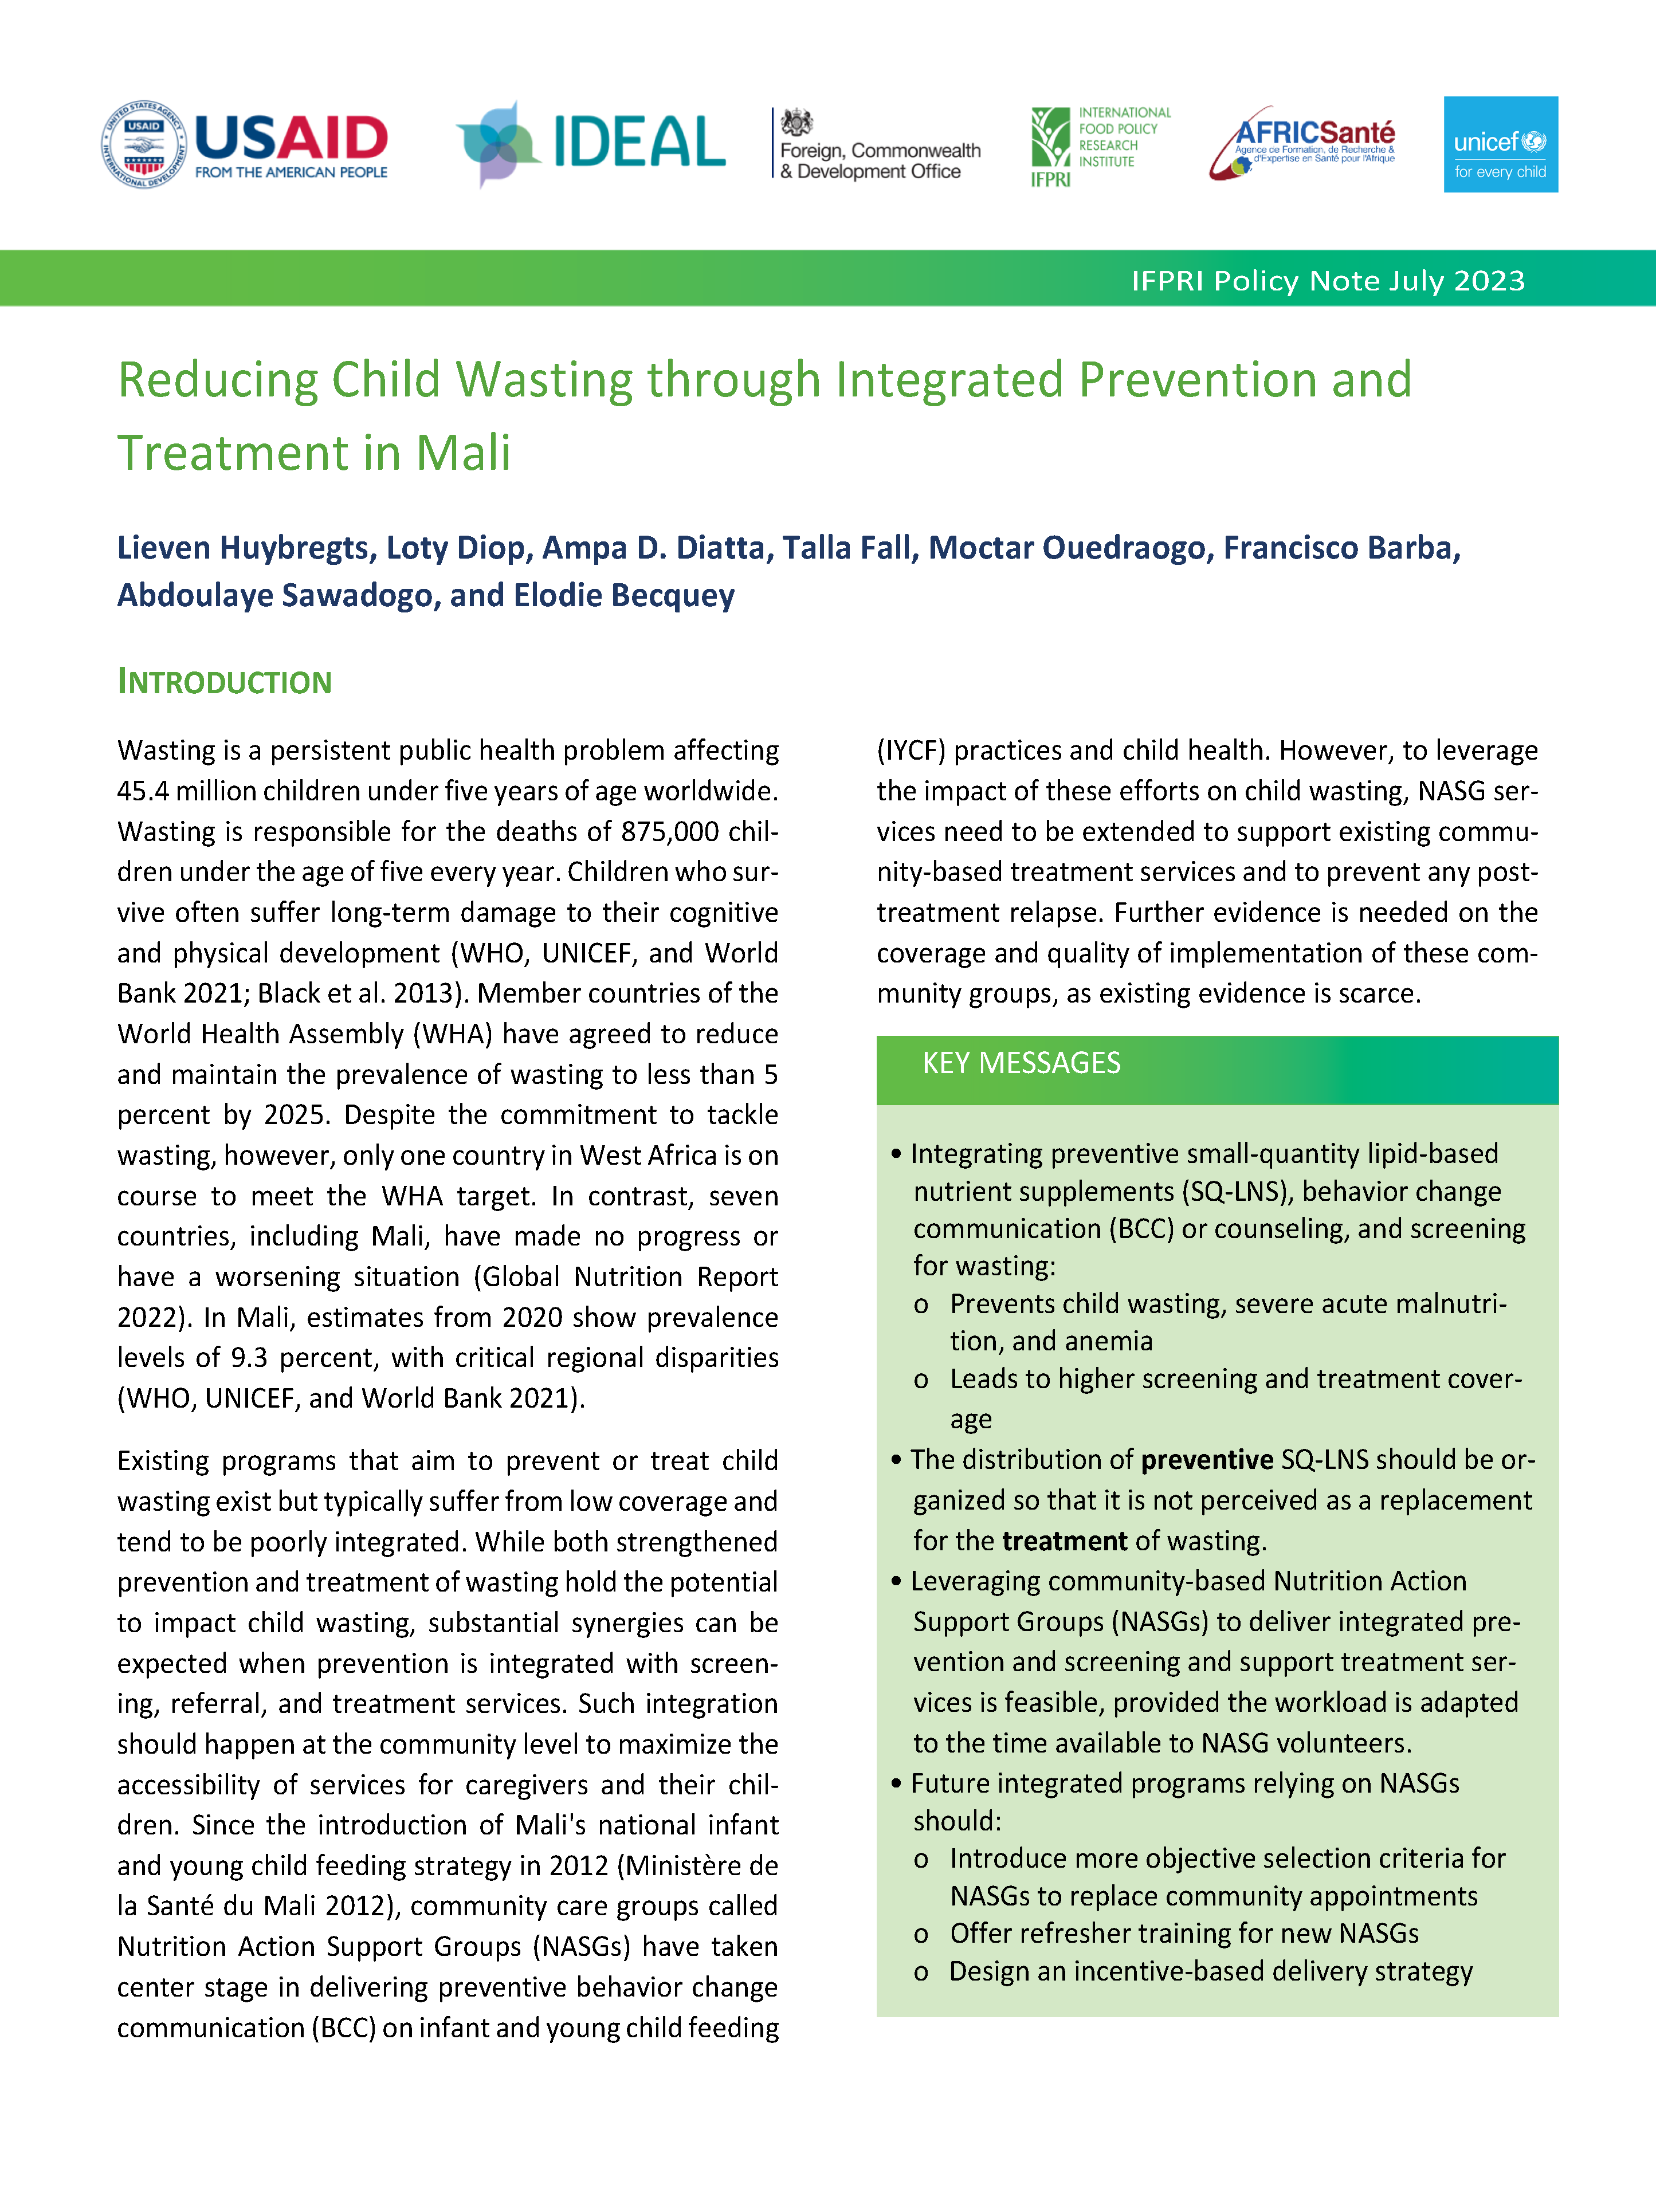 Cover page for Reducing Child Wasting through Integrated Prevention and Treatment in Mali